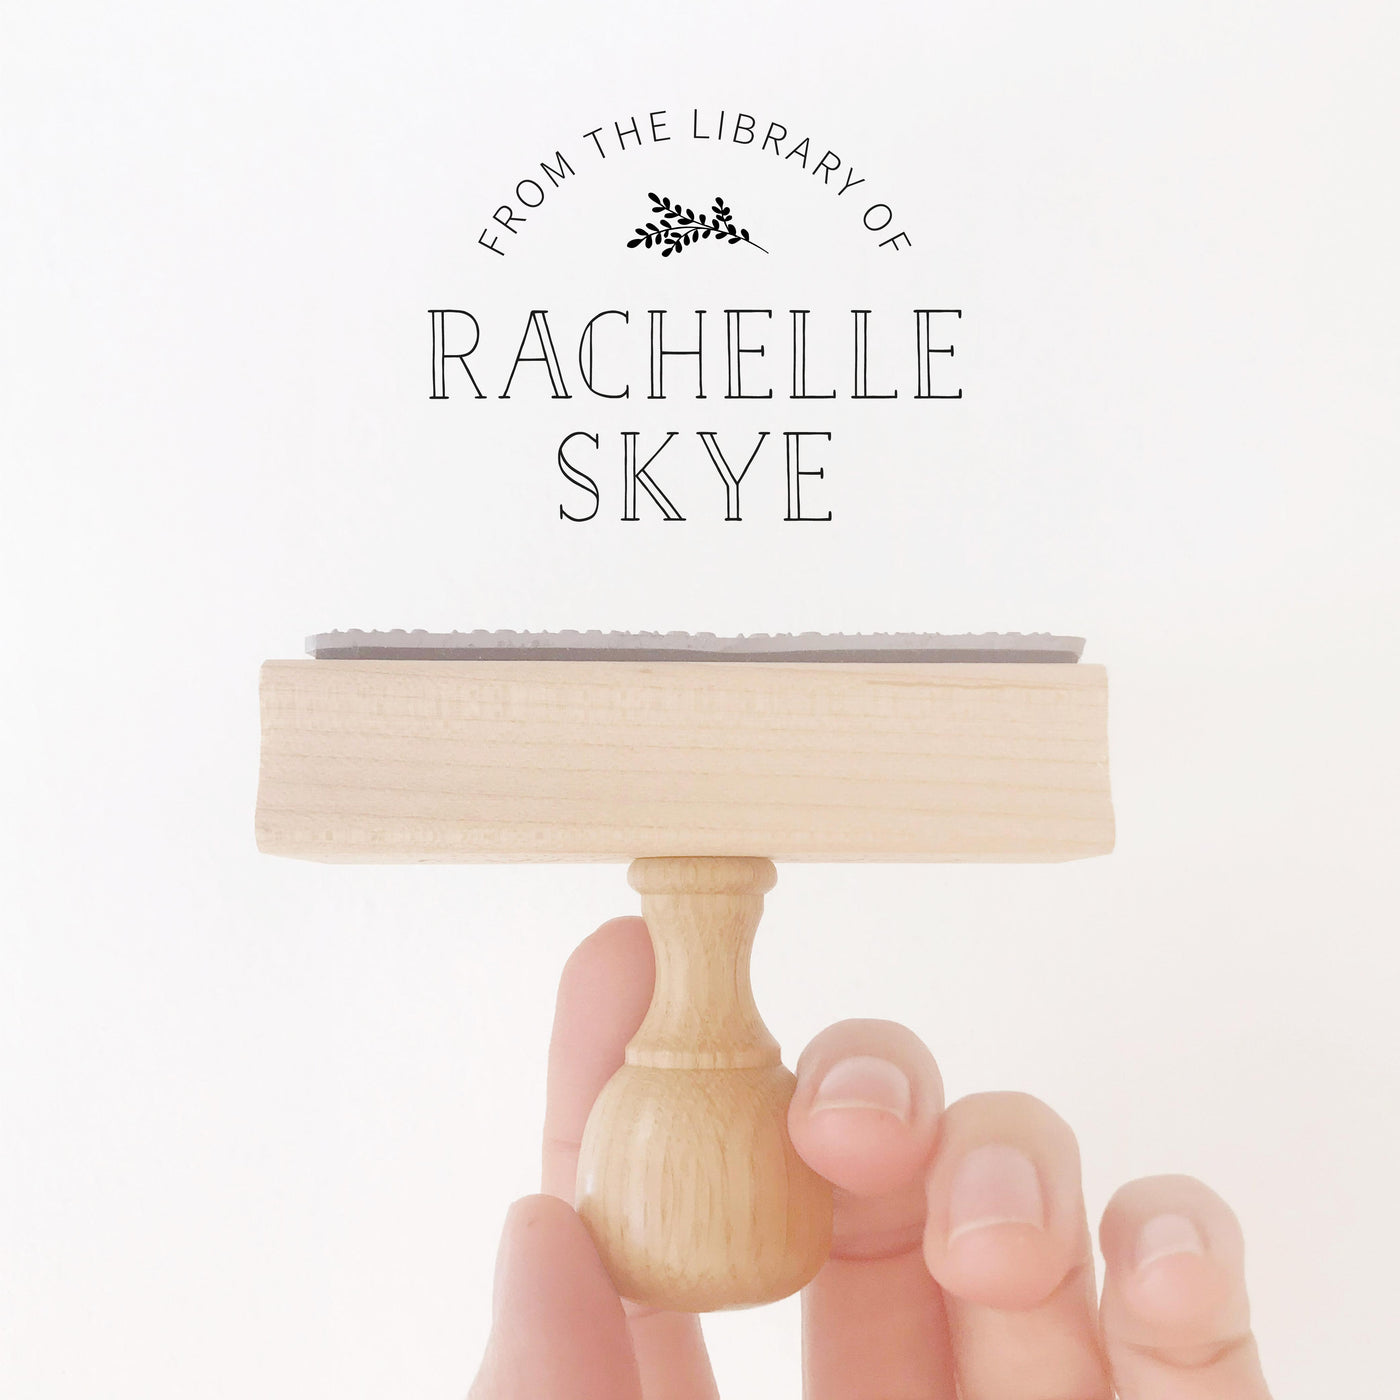 Everly Botanical Engraved Library Book Stamp | Custom Ex Libre Rubber Stamp with Wooden Handle for Wedding Couple & Family Gift, Luxe Packaging Embellishment | Heirloom Seals